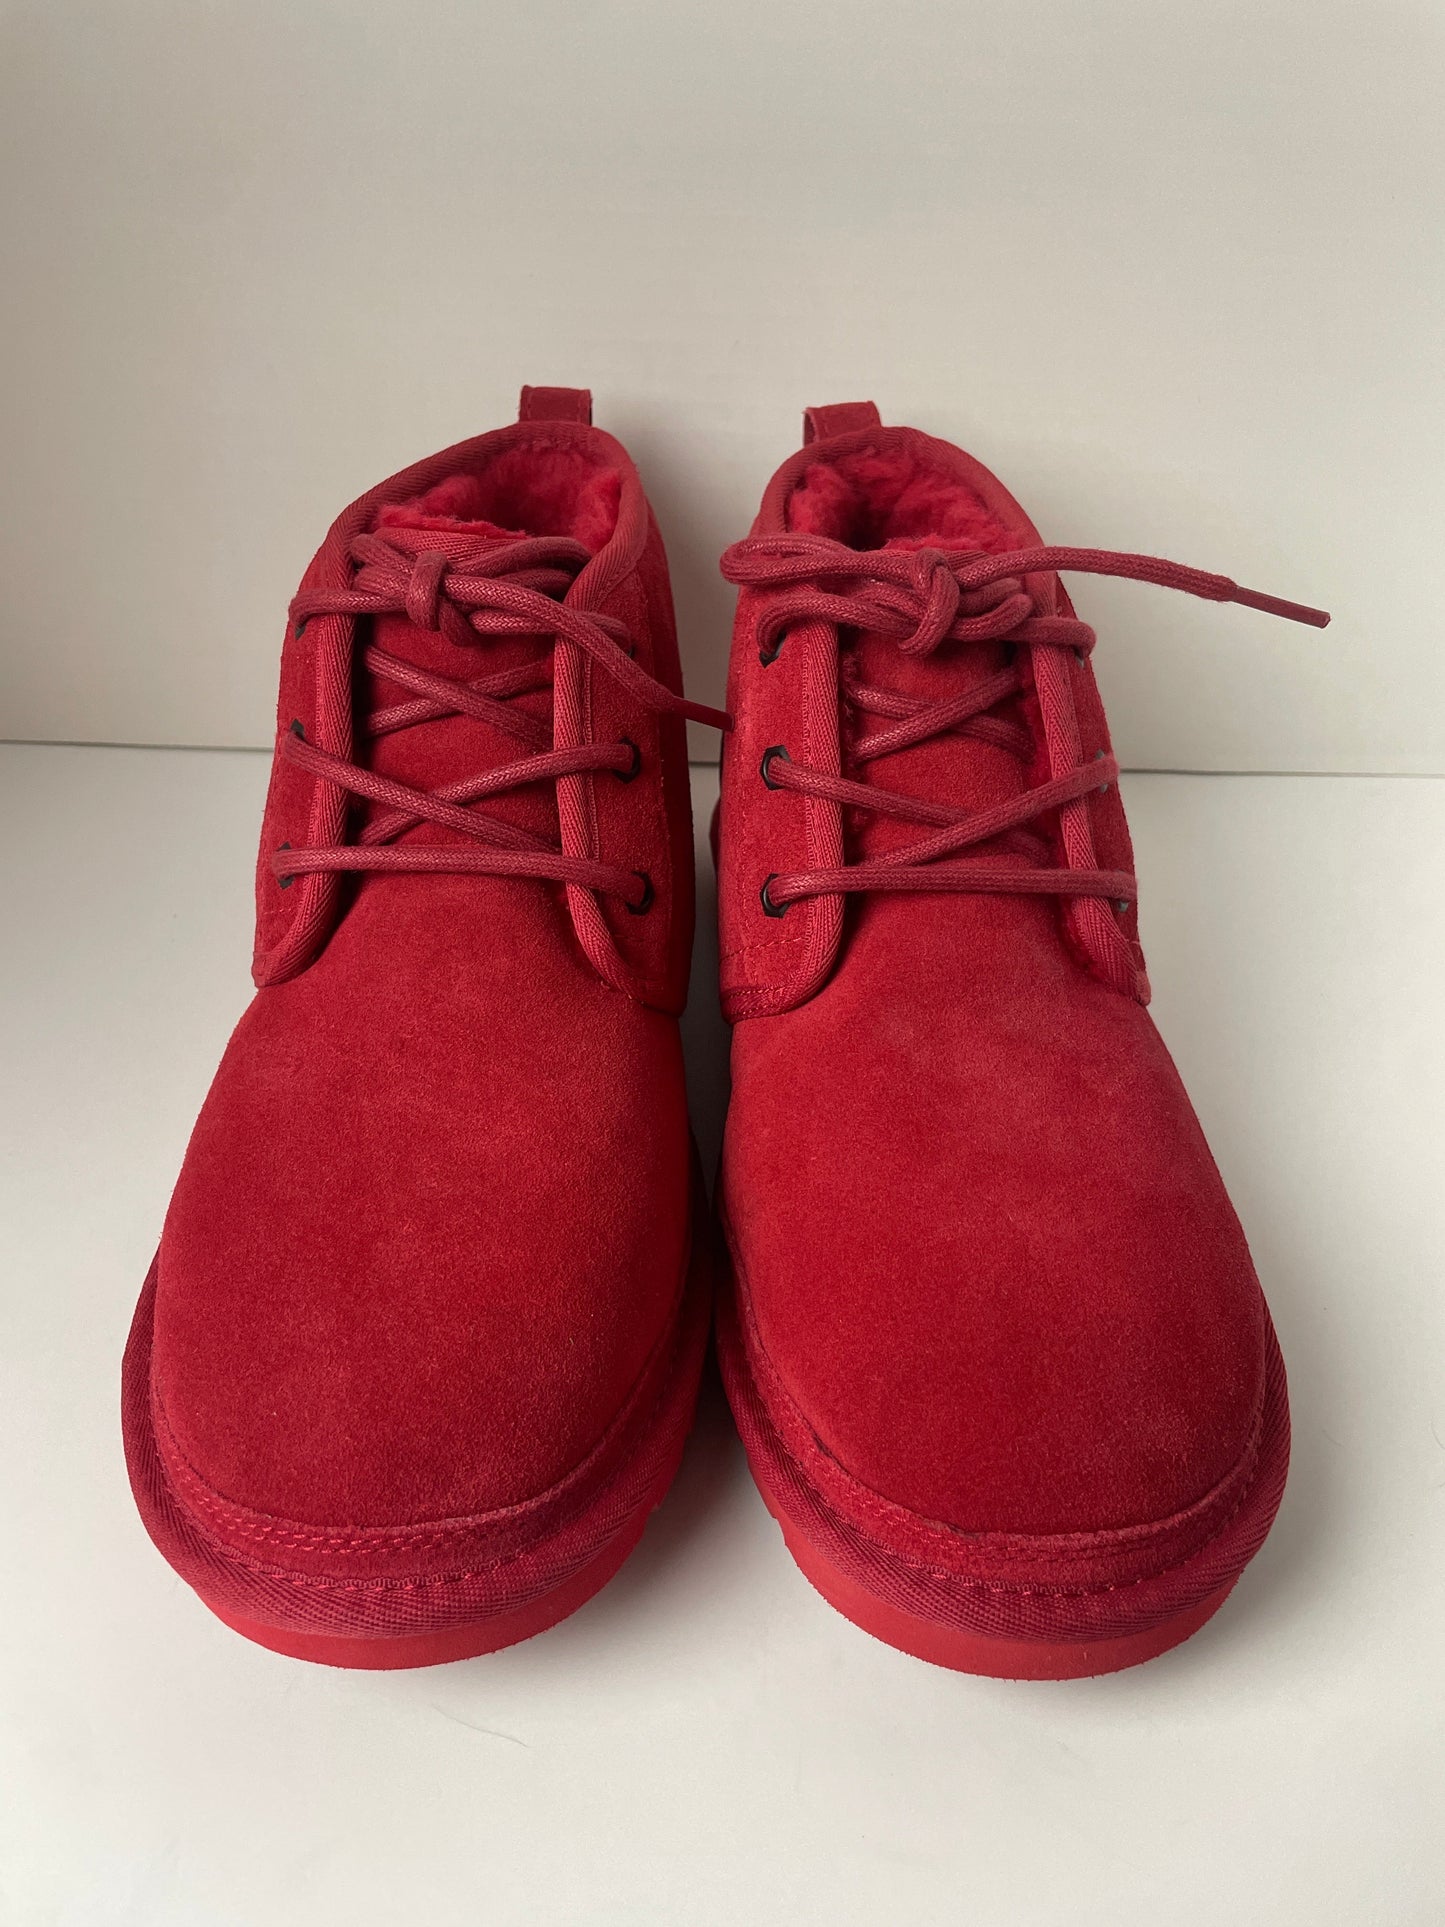 Red Shoes Flats Ugg, Size 9